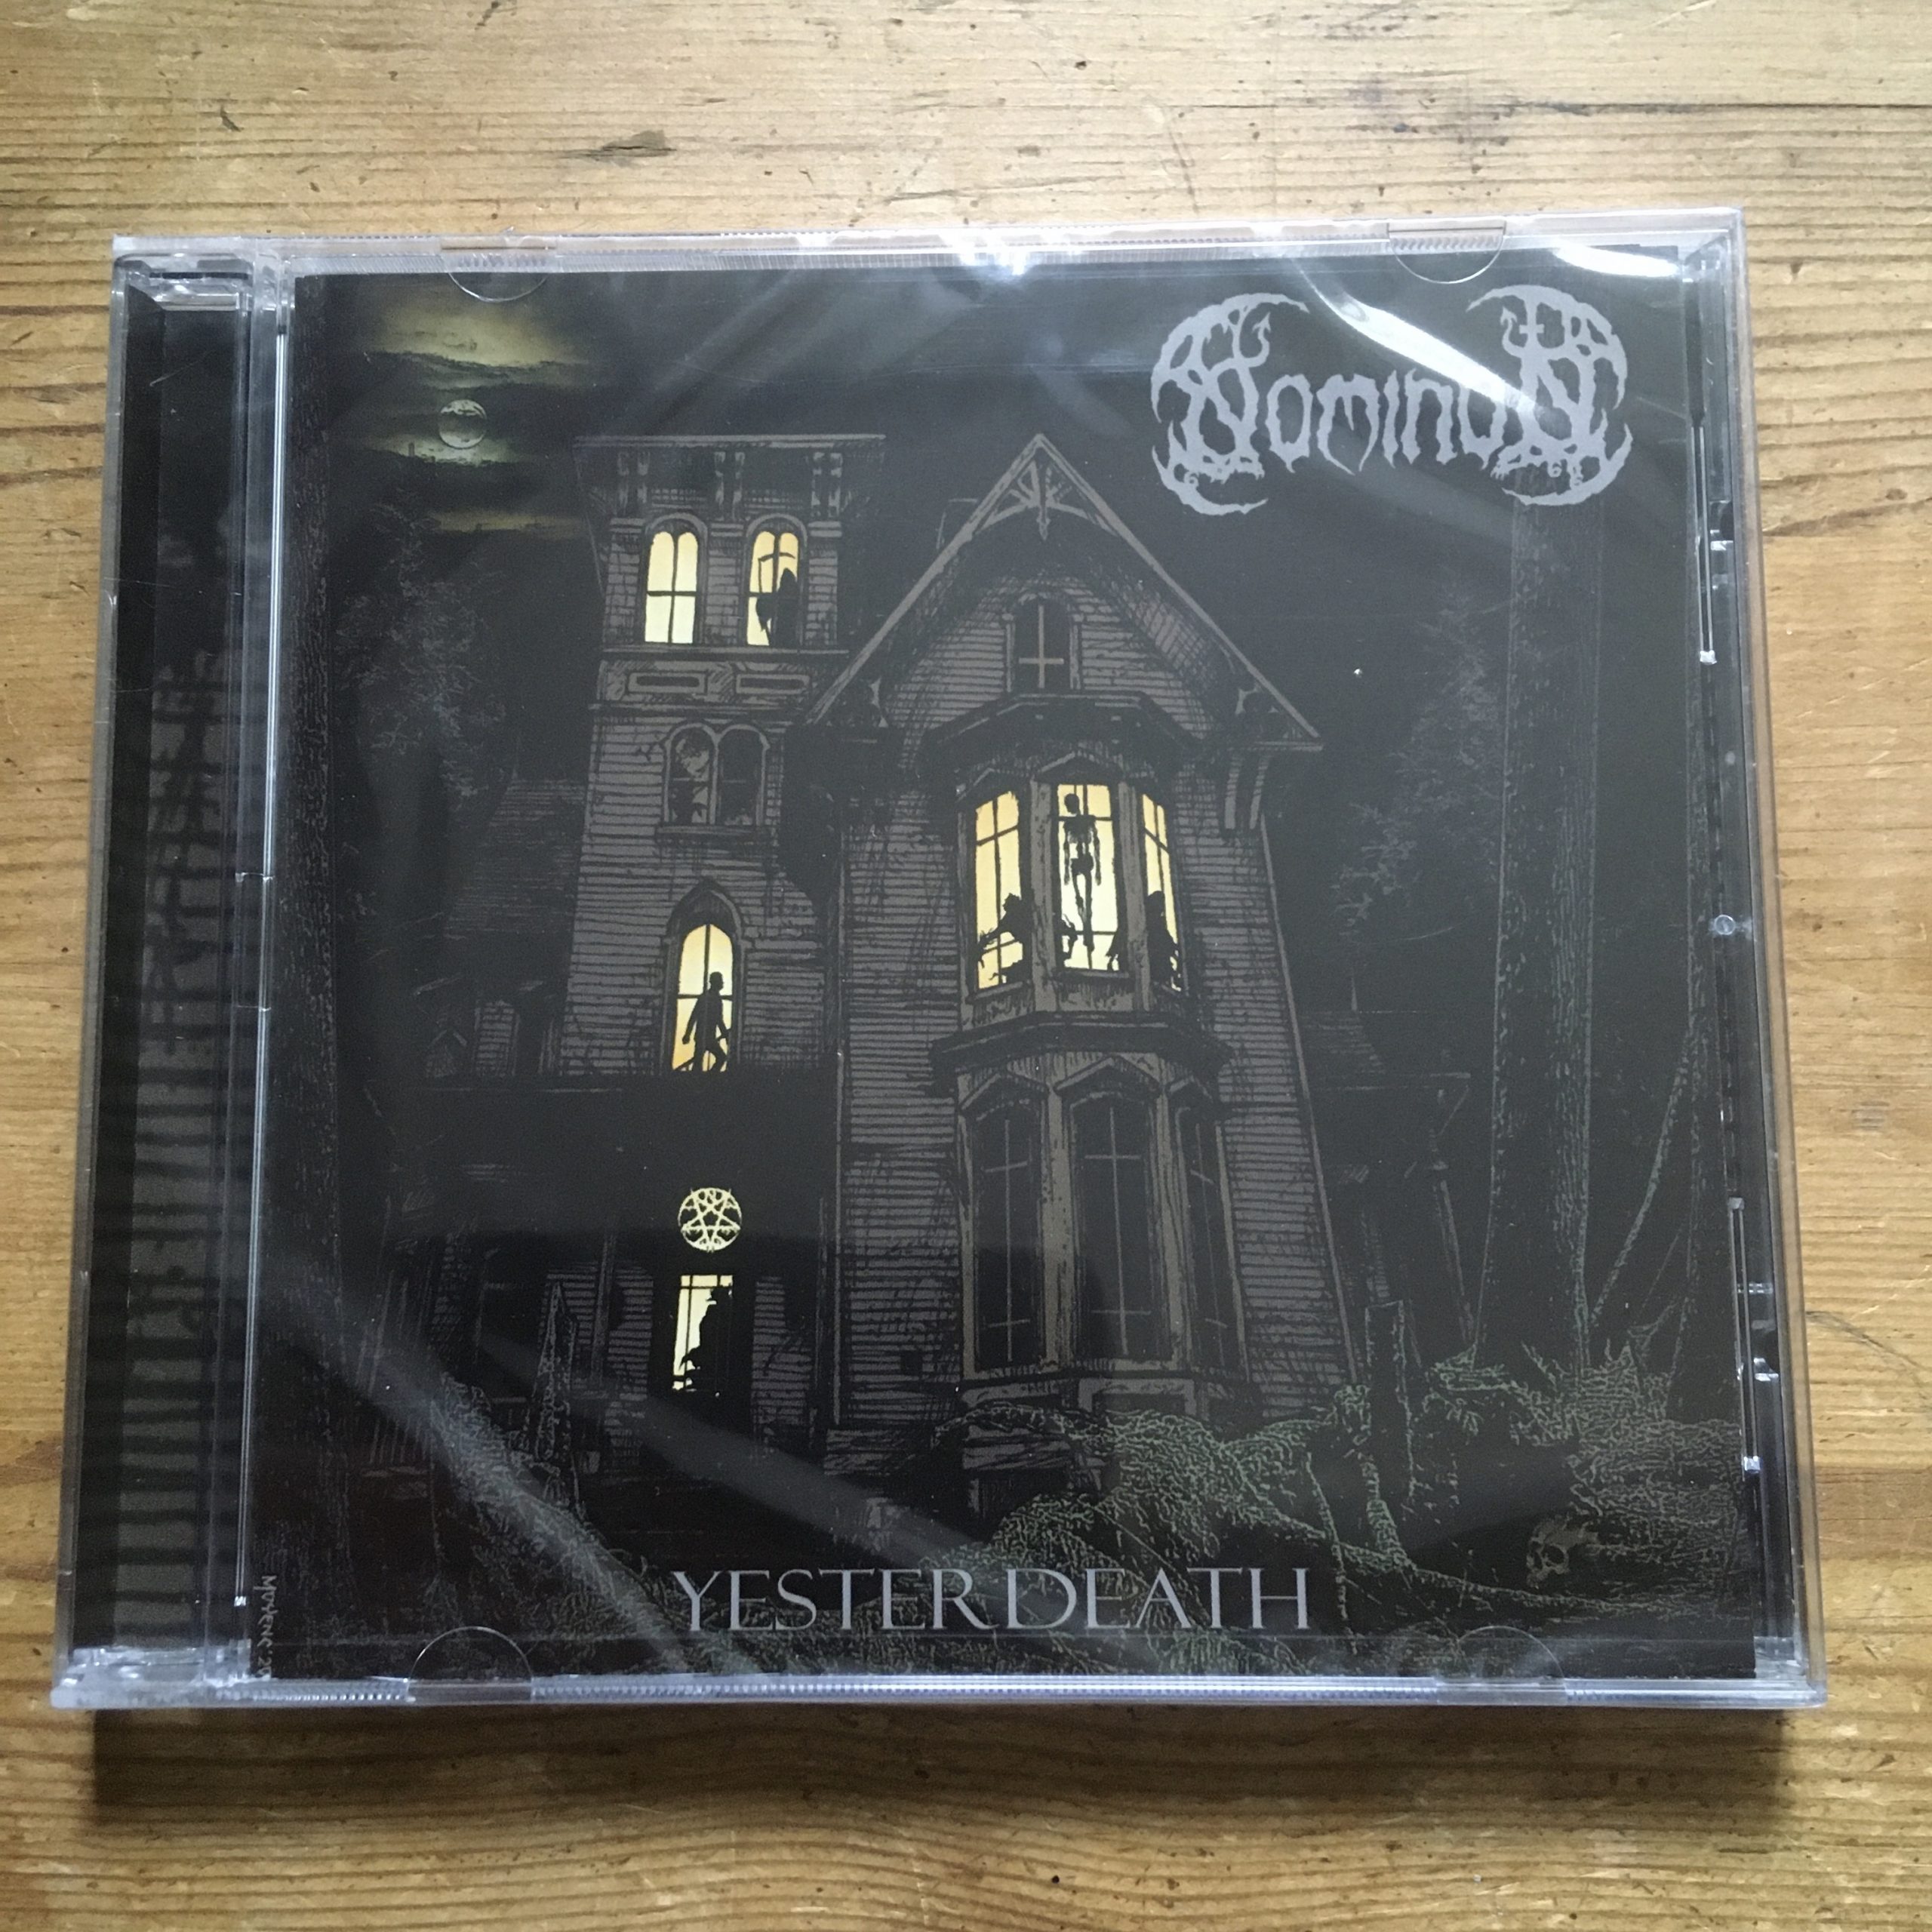 Photo of the Nominon - "Yesterdeath" CD